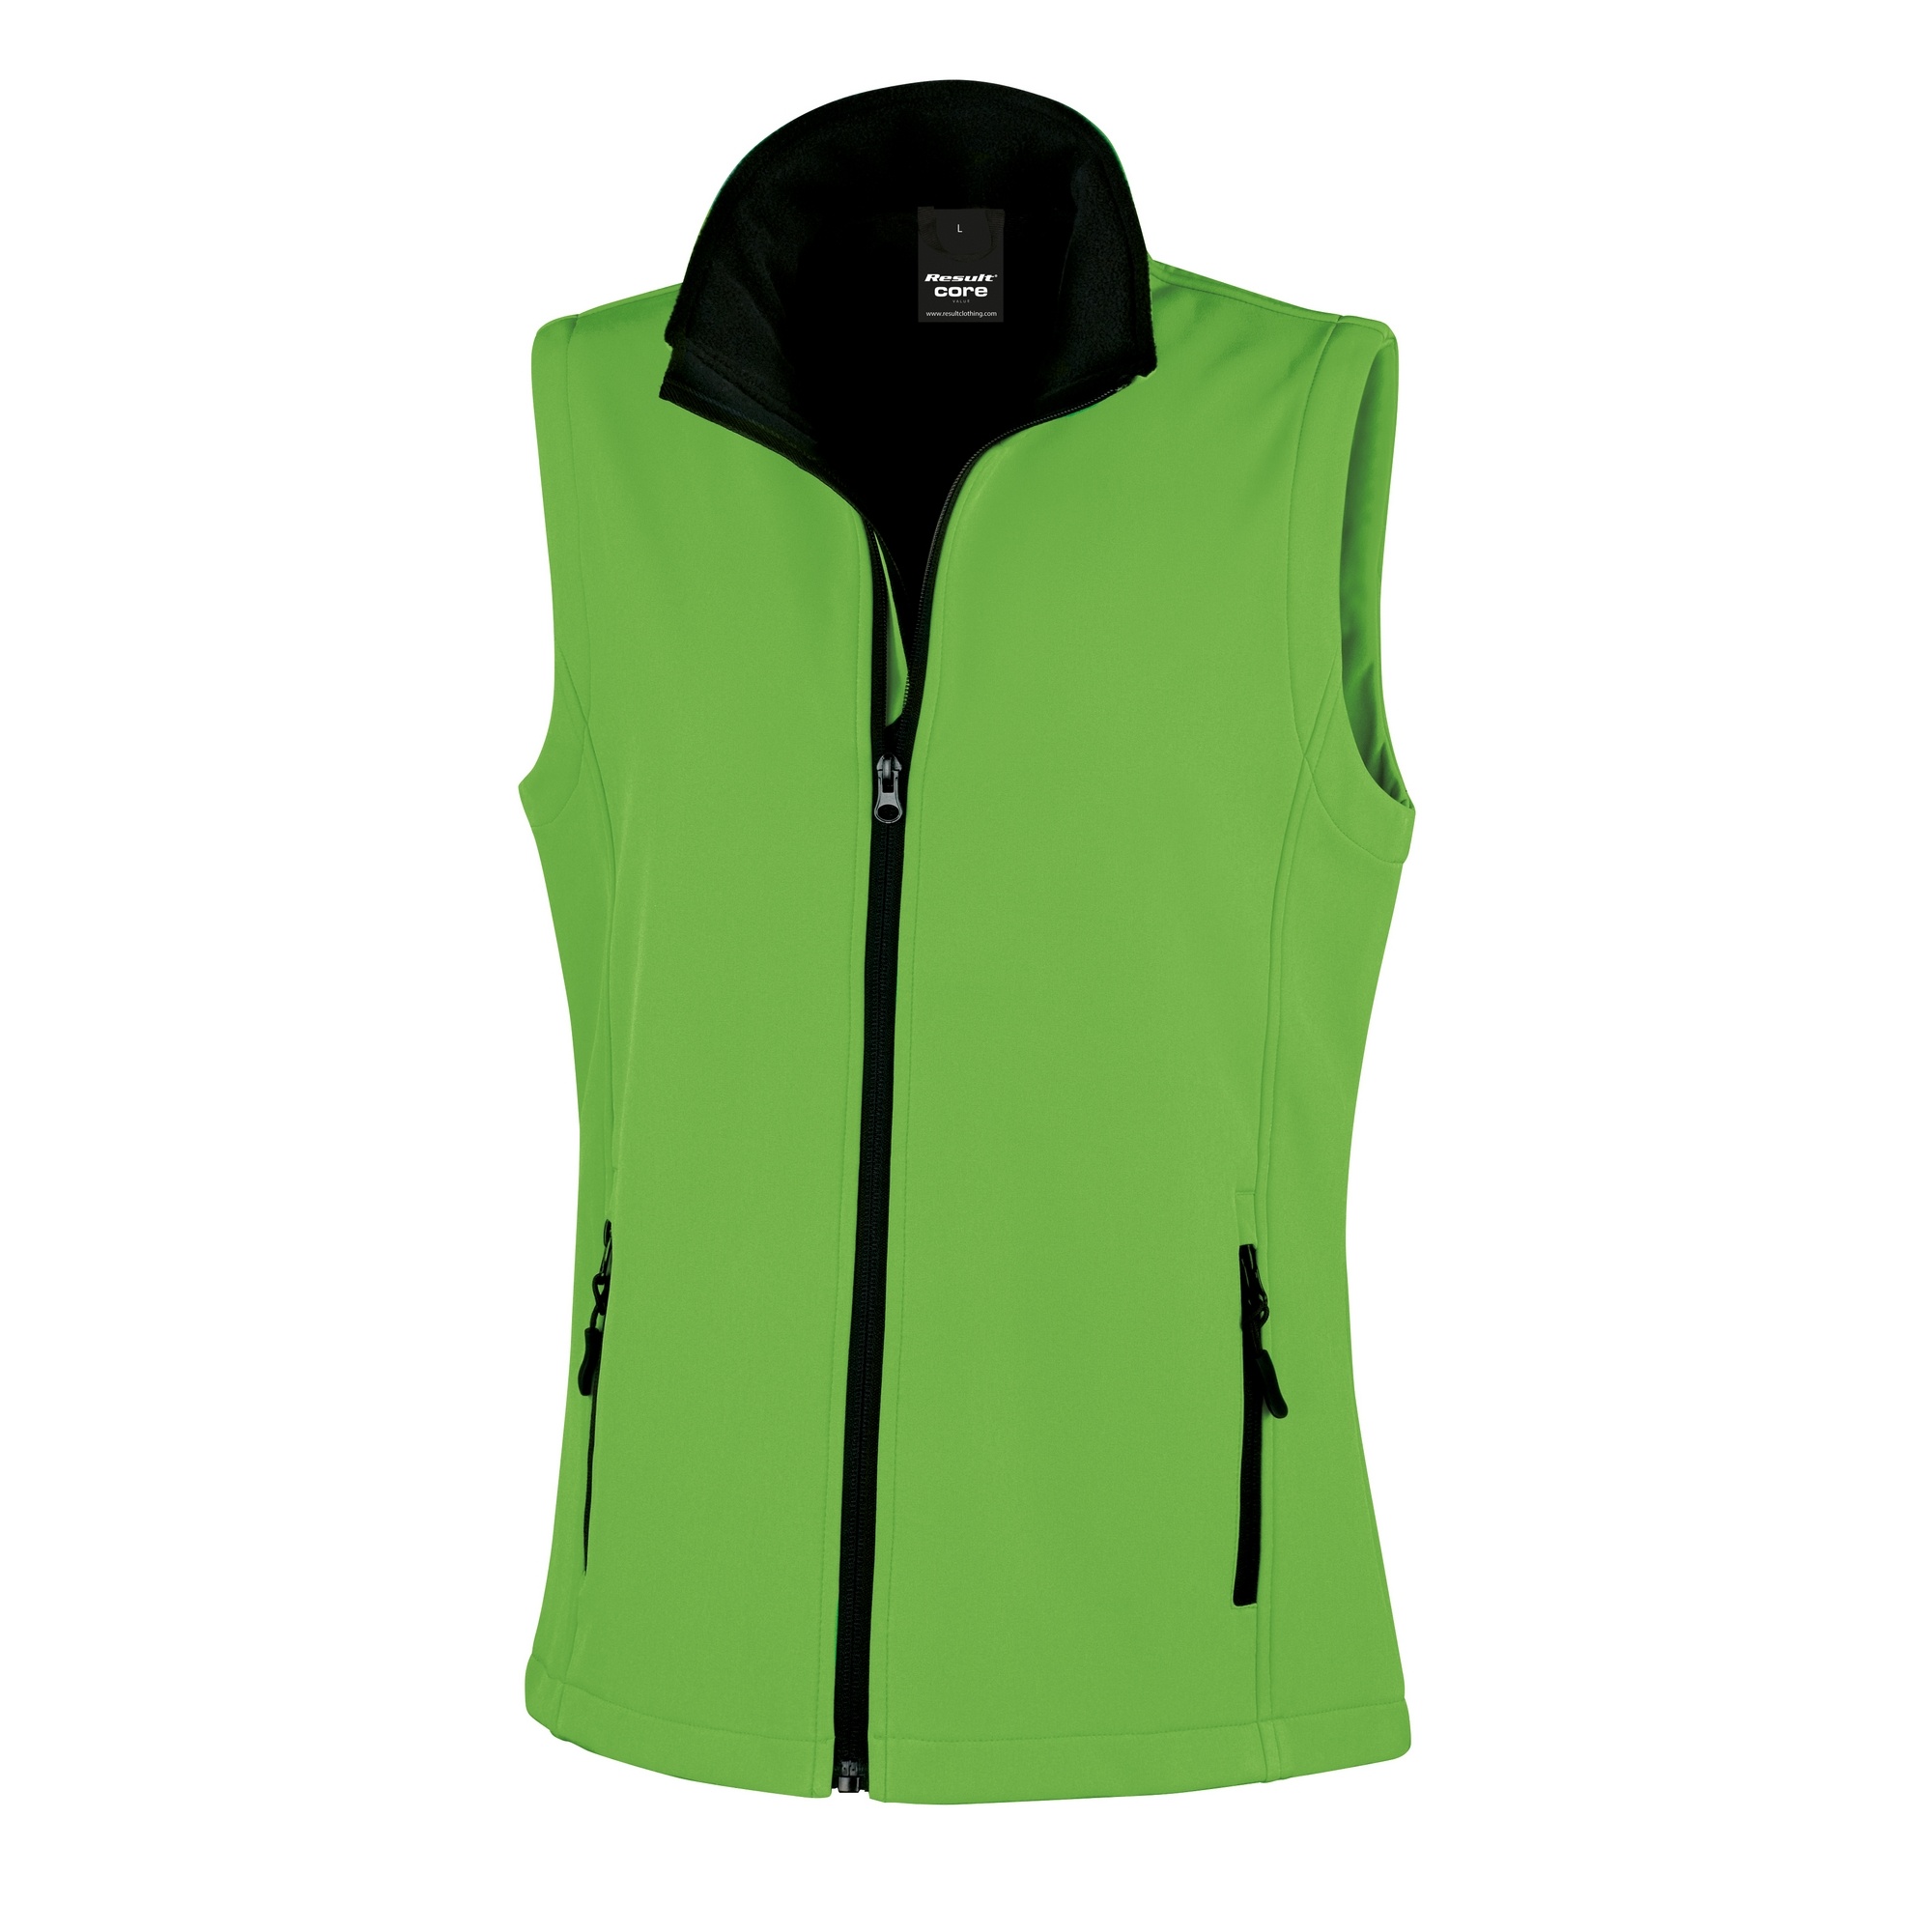 Chaleco Core Softshell Result - verde-negro - 